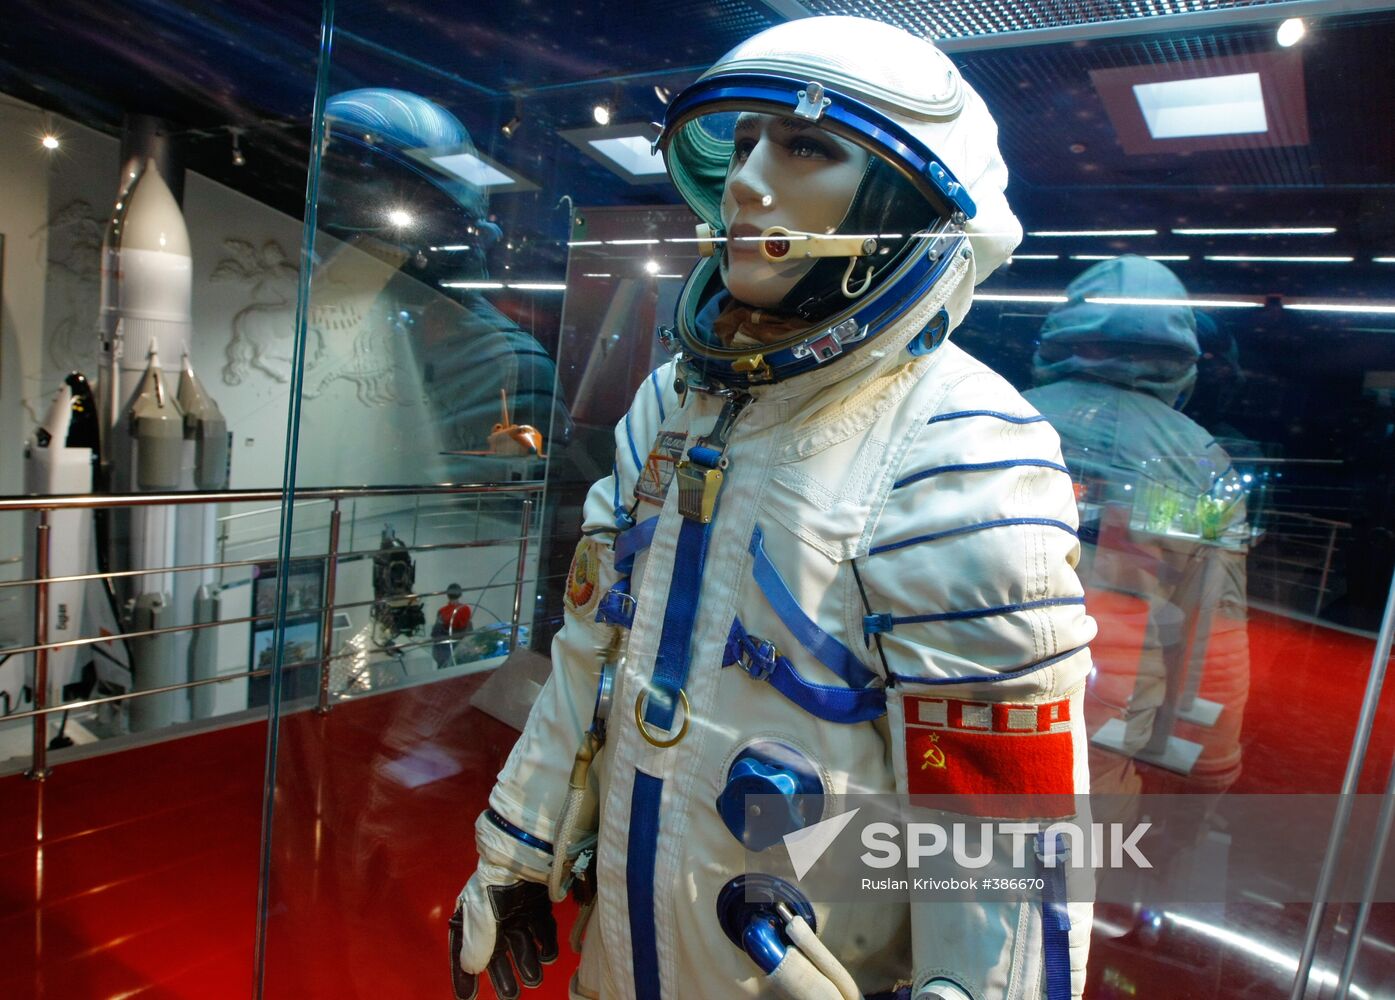 Renovated Russian Space Museum reopens on Star Alley